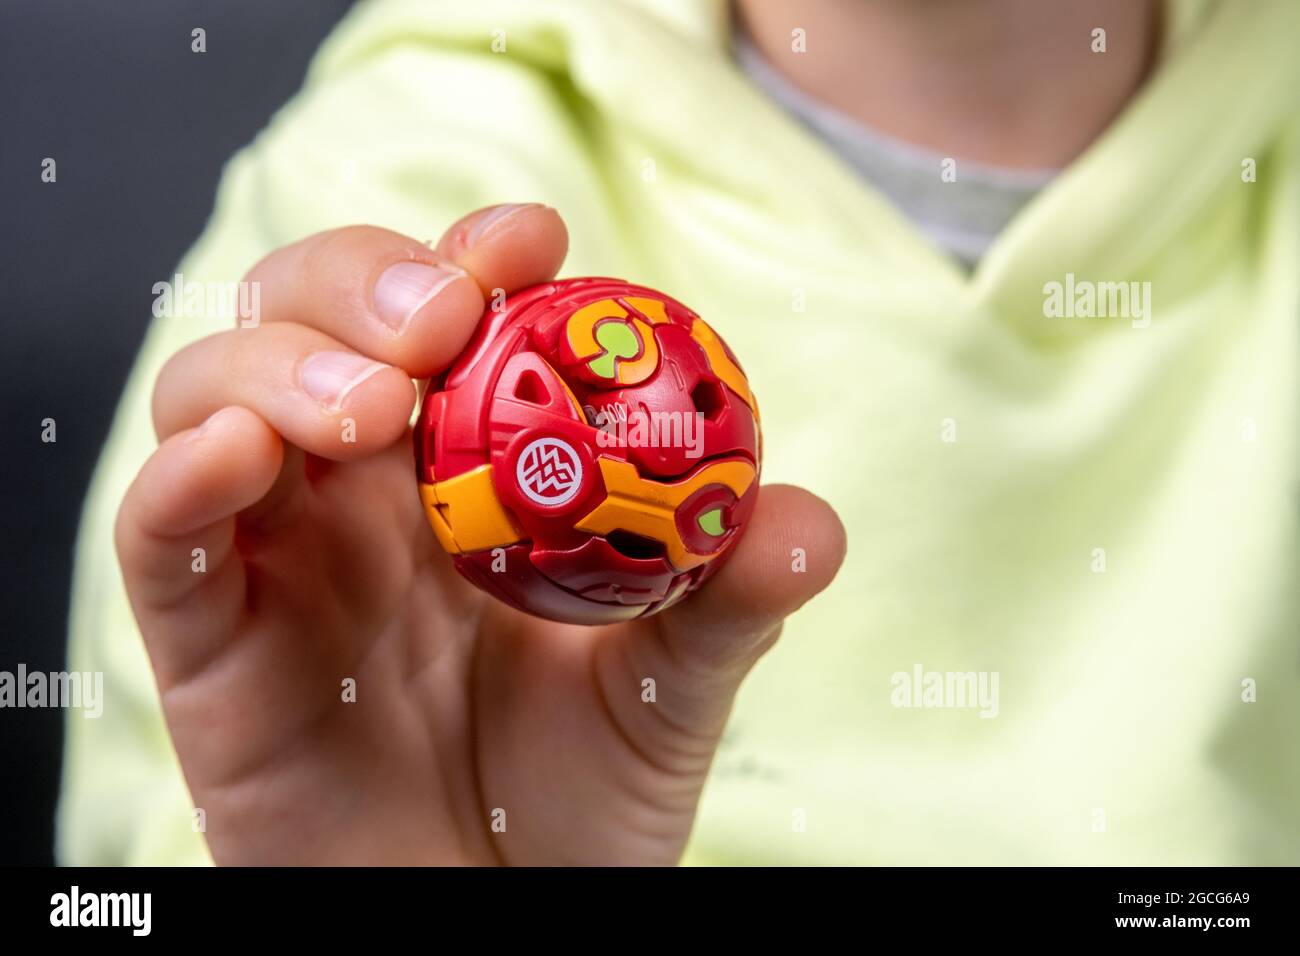 Bakugan Ball toy. New popular transformer toy assembled in ball shape, hold  in child's hand. Stafford, United Kingdom, August 8, 2021 Stock Photo -  Alamy